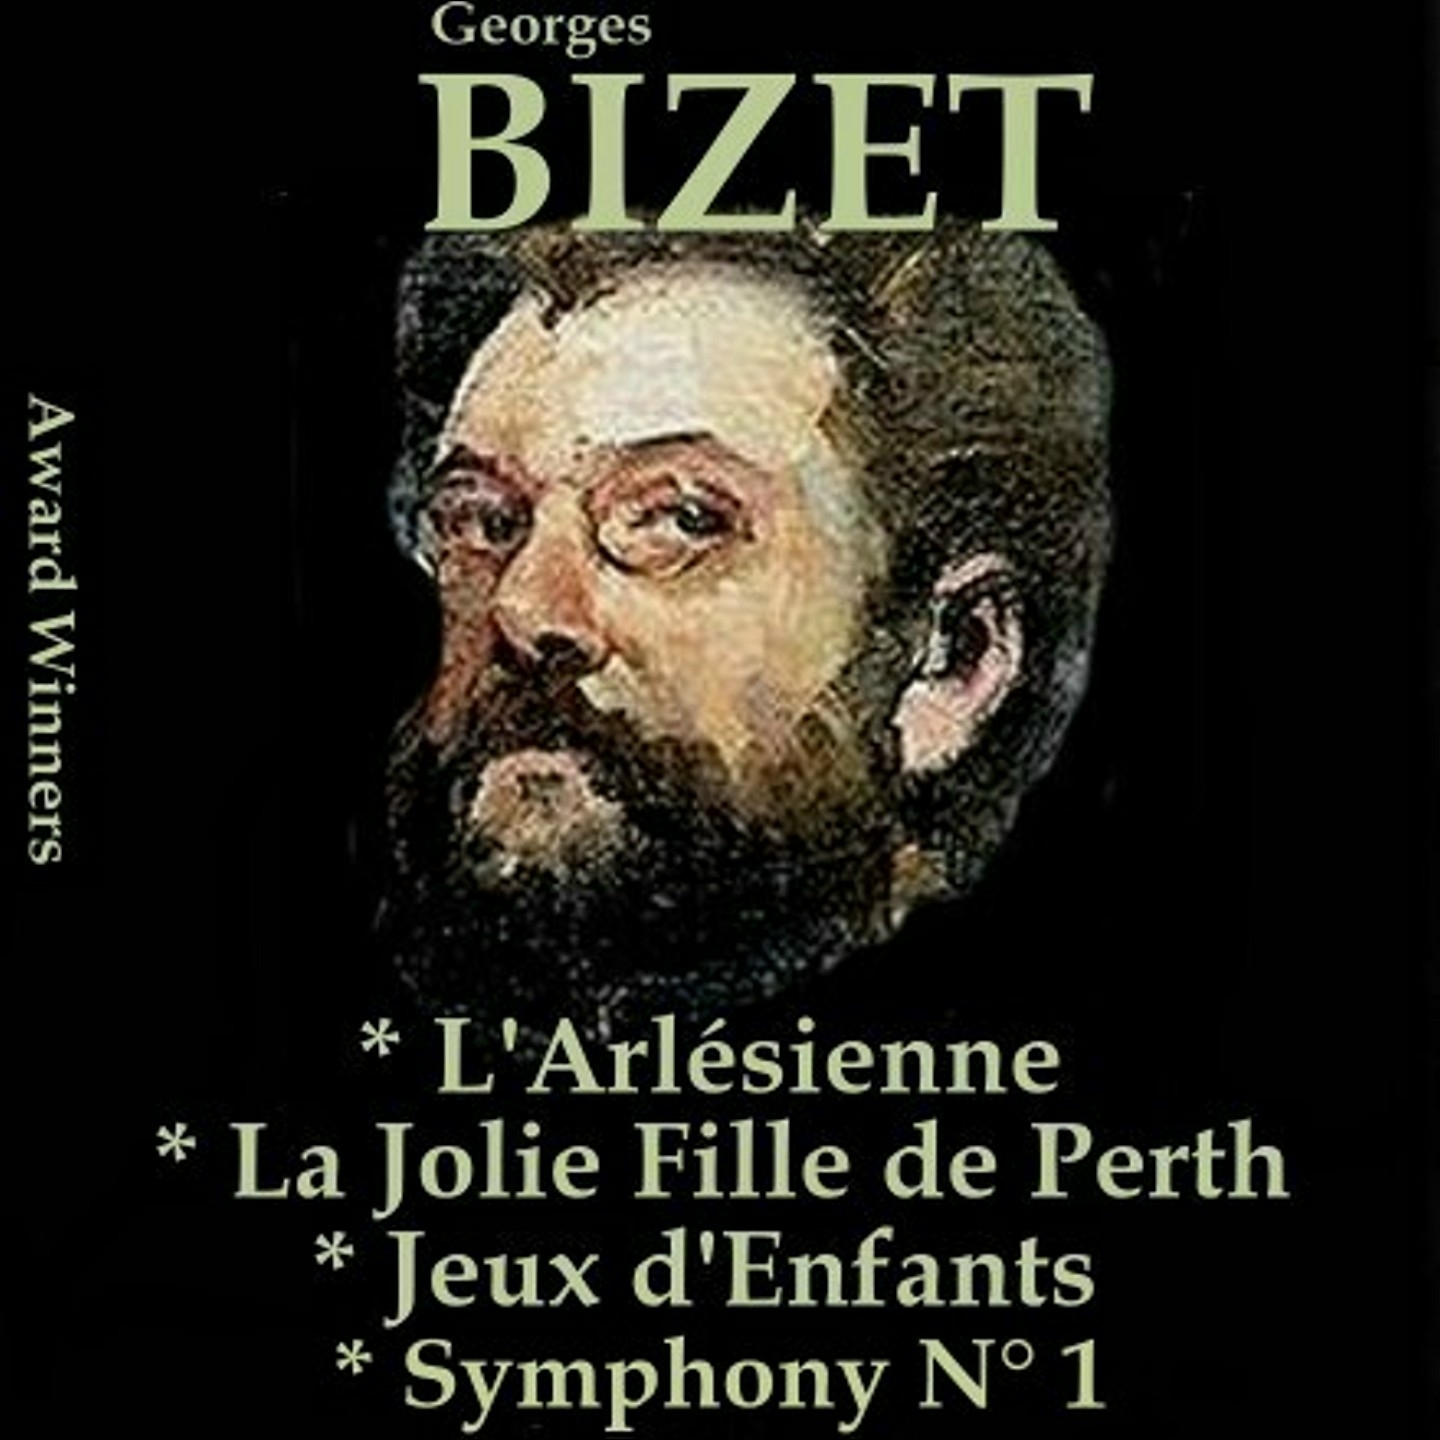 Bizet, Vol. 5 : The Arlesian Suite, The Lovely Girl from Perth, Jeux d'Enfants & Symphony No. 1